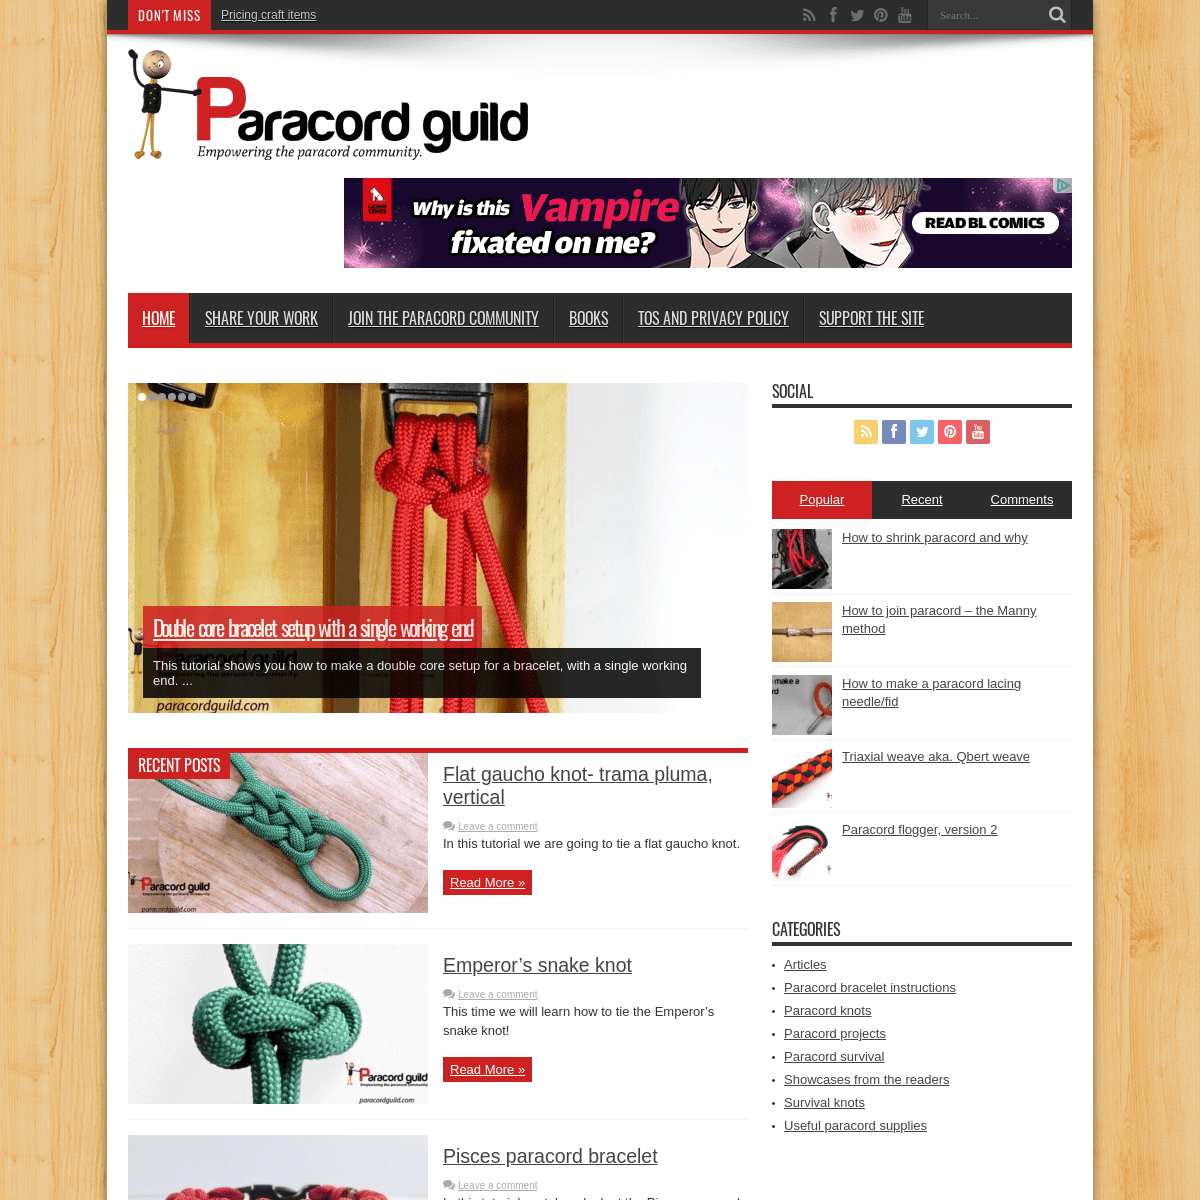 Paracord guild - Empowering the paracord community.